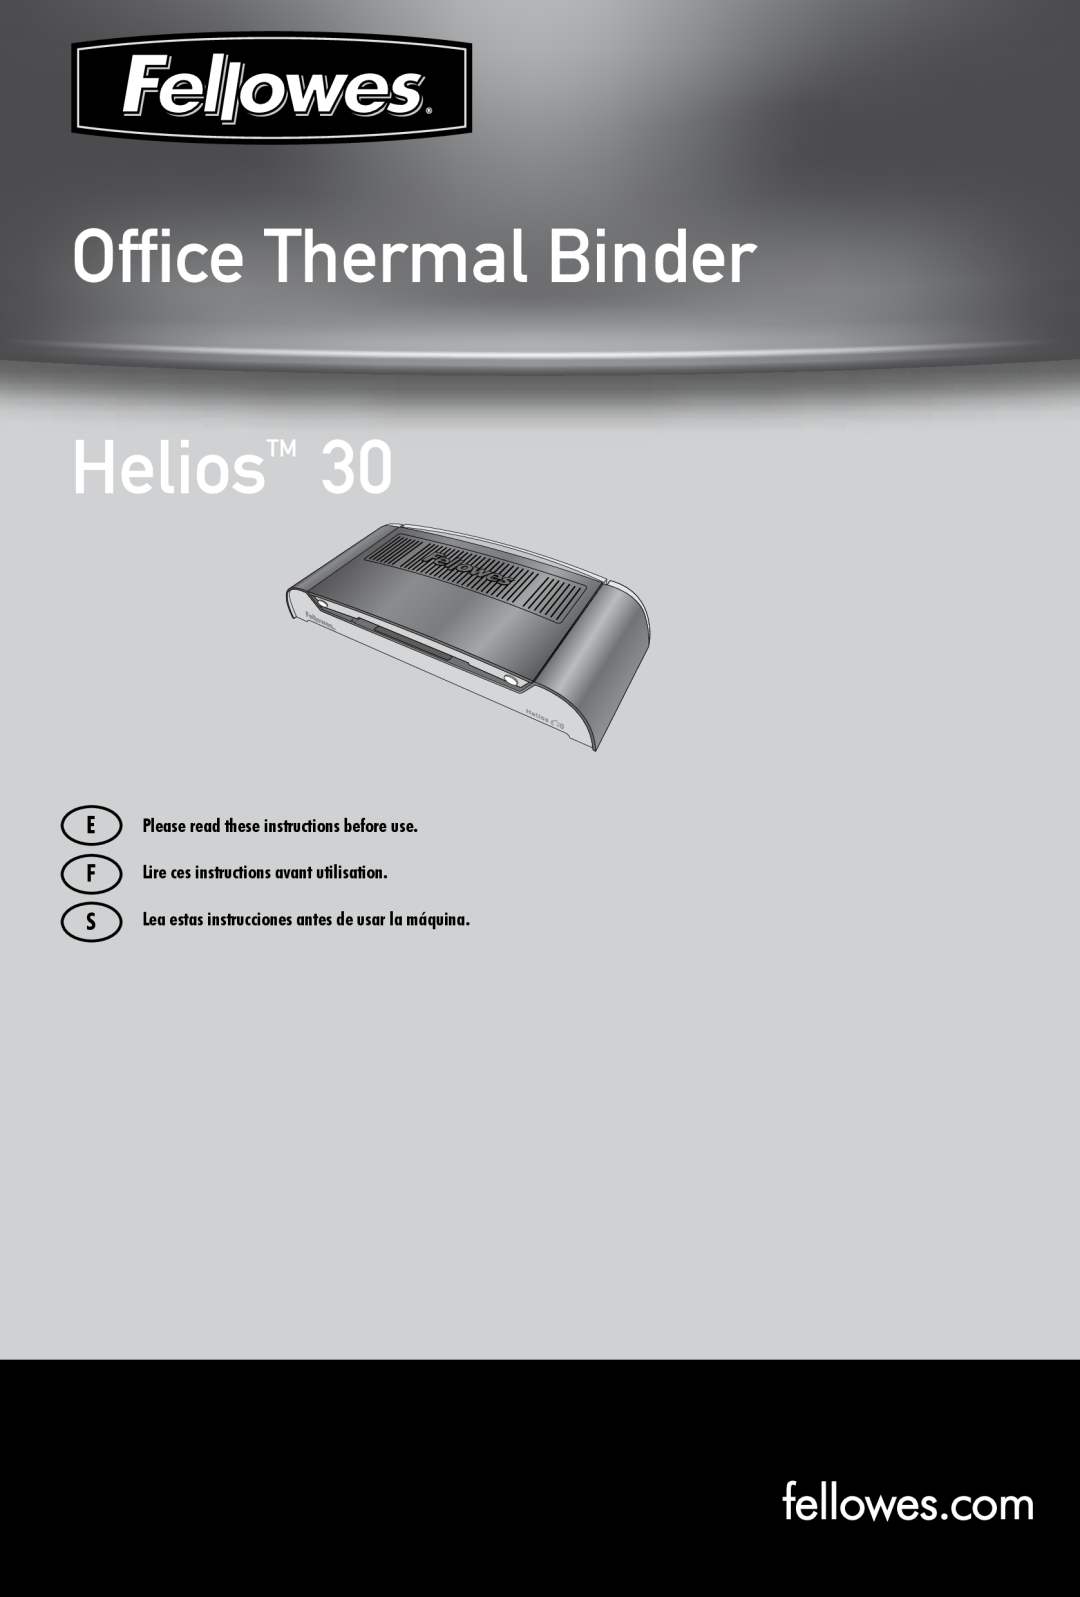 Fellowes 30TM manual Ofce Thermal Binder HeliosTM, E Please read these instructions before use 